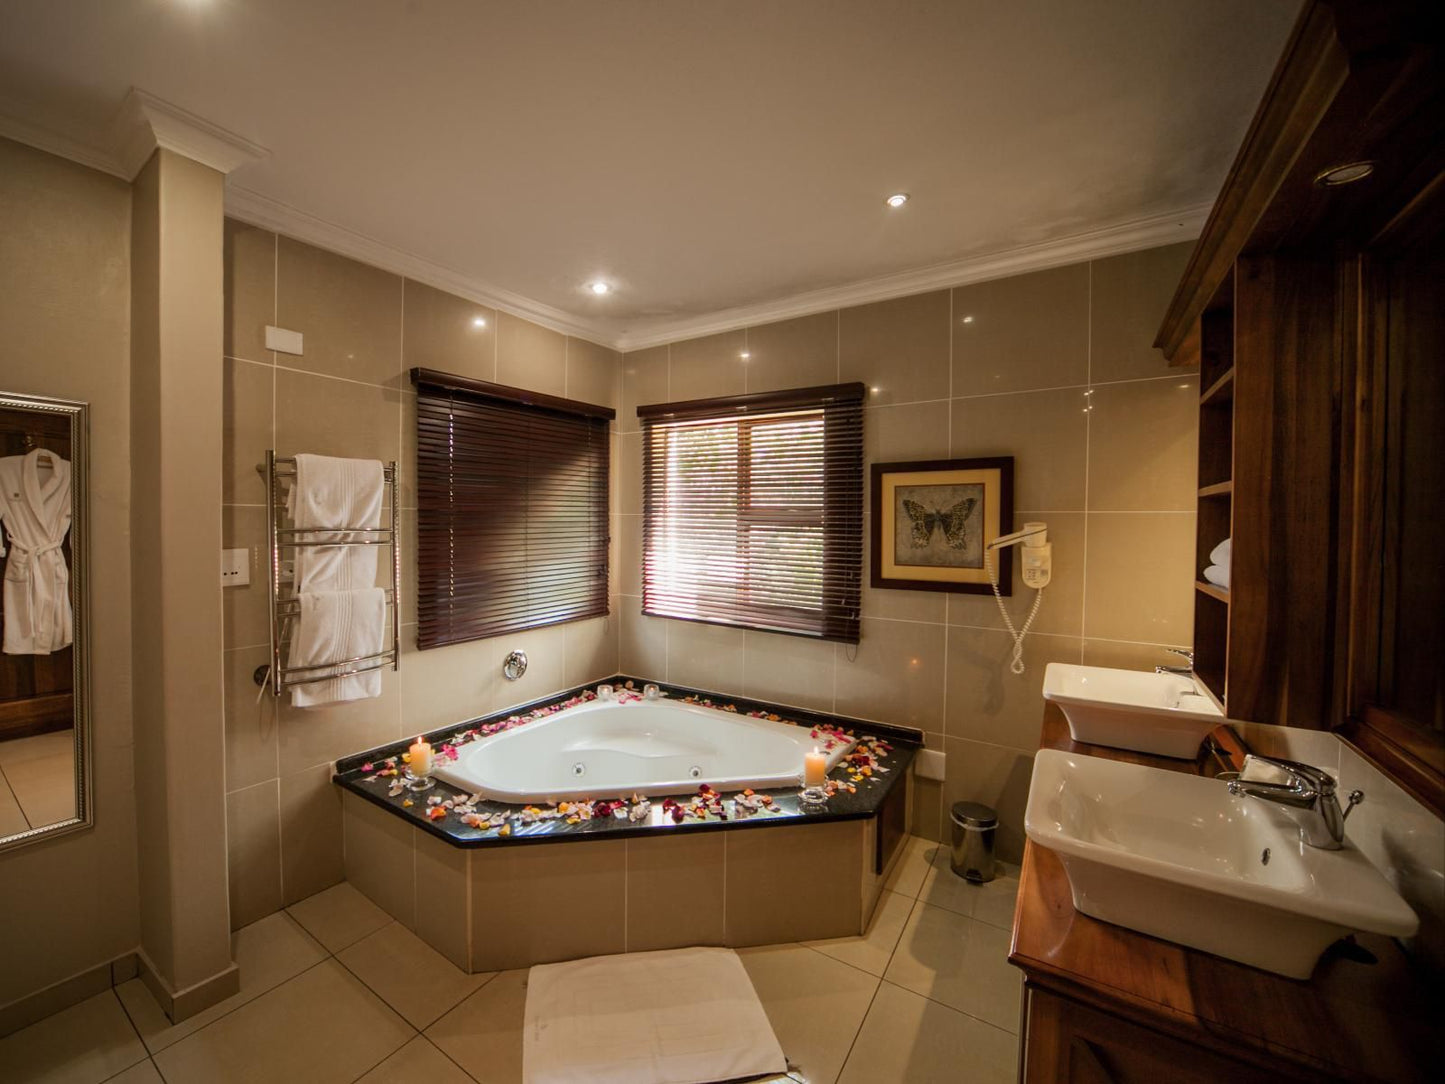 Fairview Hotels Spa And Golf Resort Tzaneen Limpopo Province South Africa Bathroom